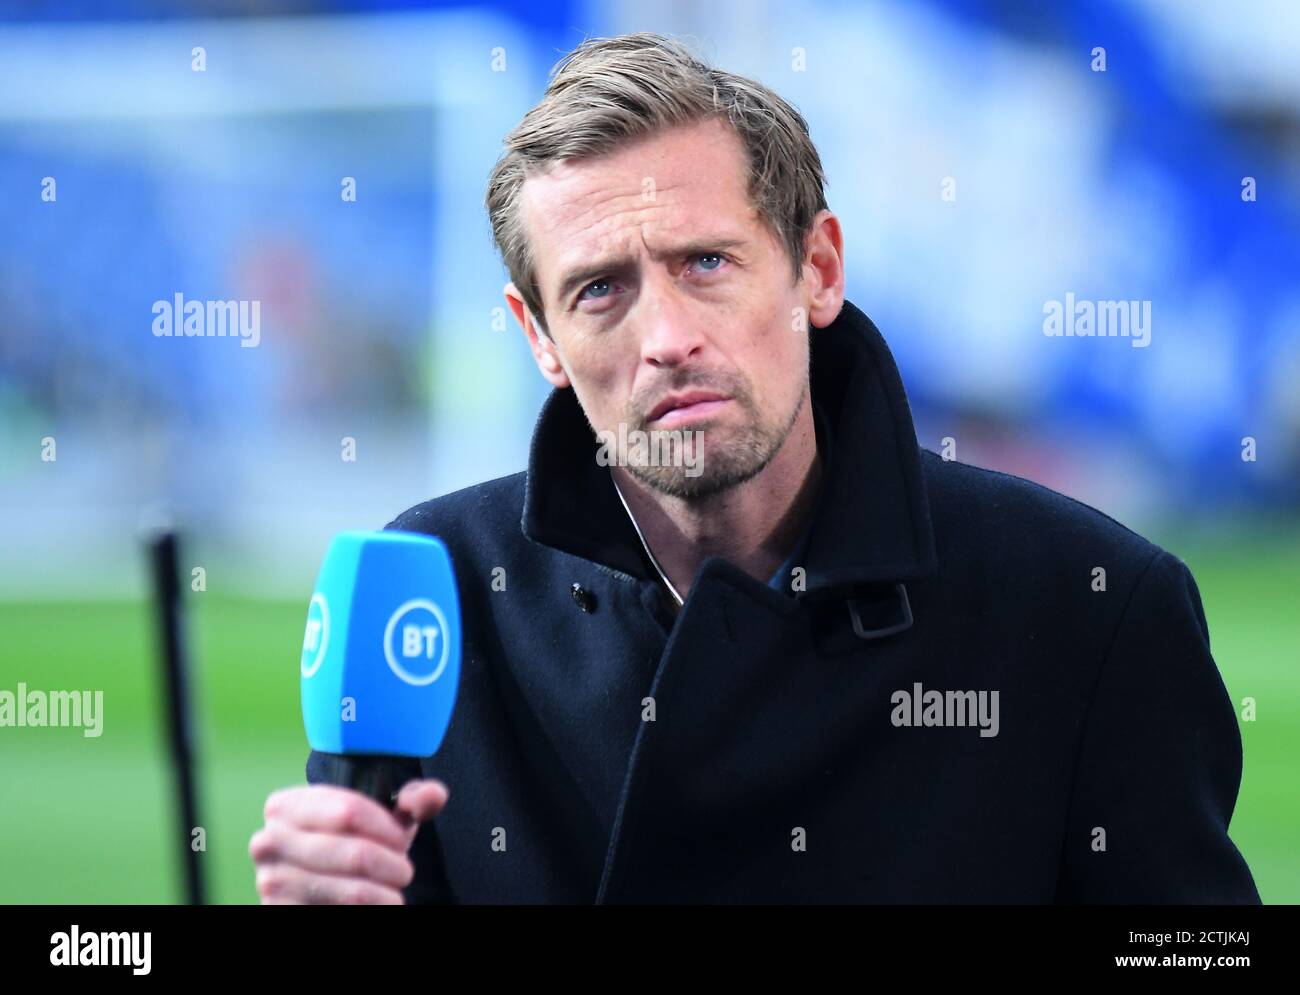 LONDON, ENGLAND - FEBRUARY 22, 2020: Peter Crouch pictured ahead of the 2019/20 Premier League game between Chelsea FC and Tottenham Hotspur FC at Stamford Bridge. Stock Photo